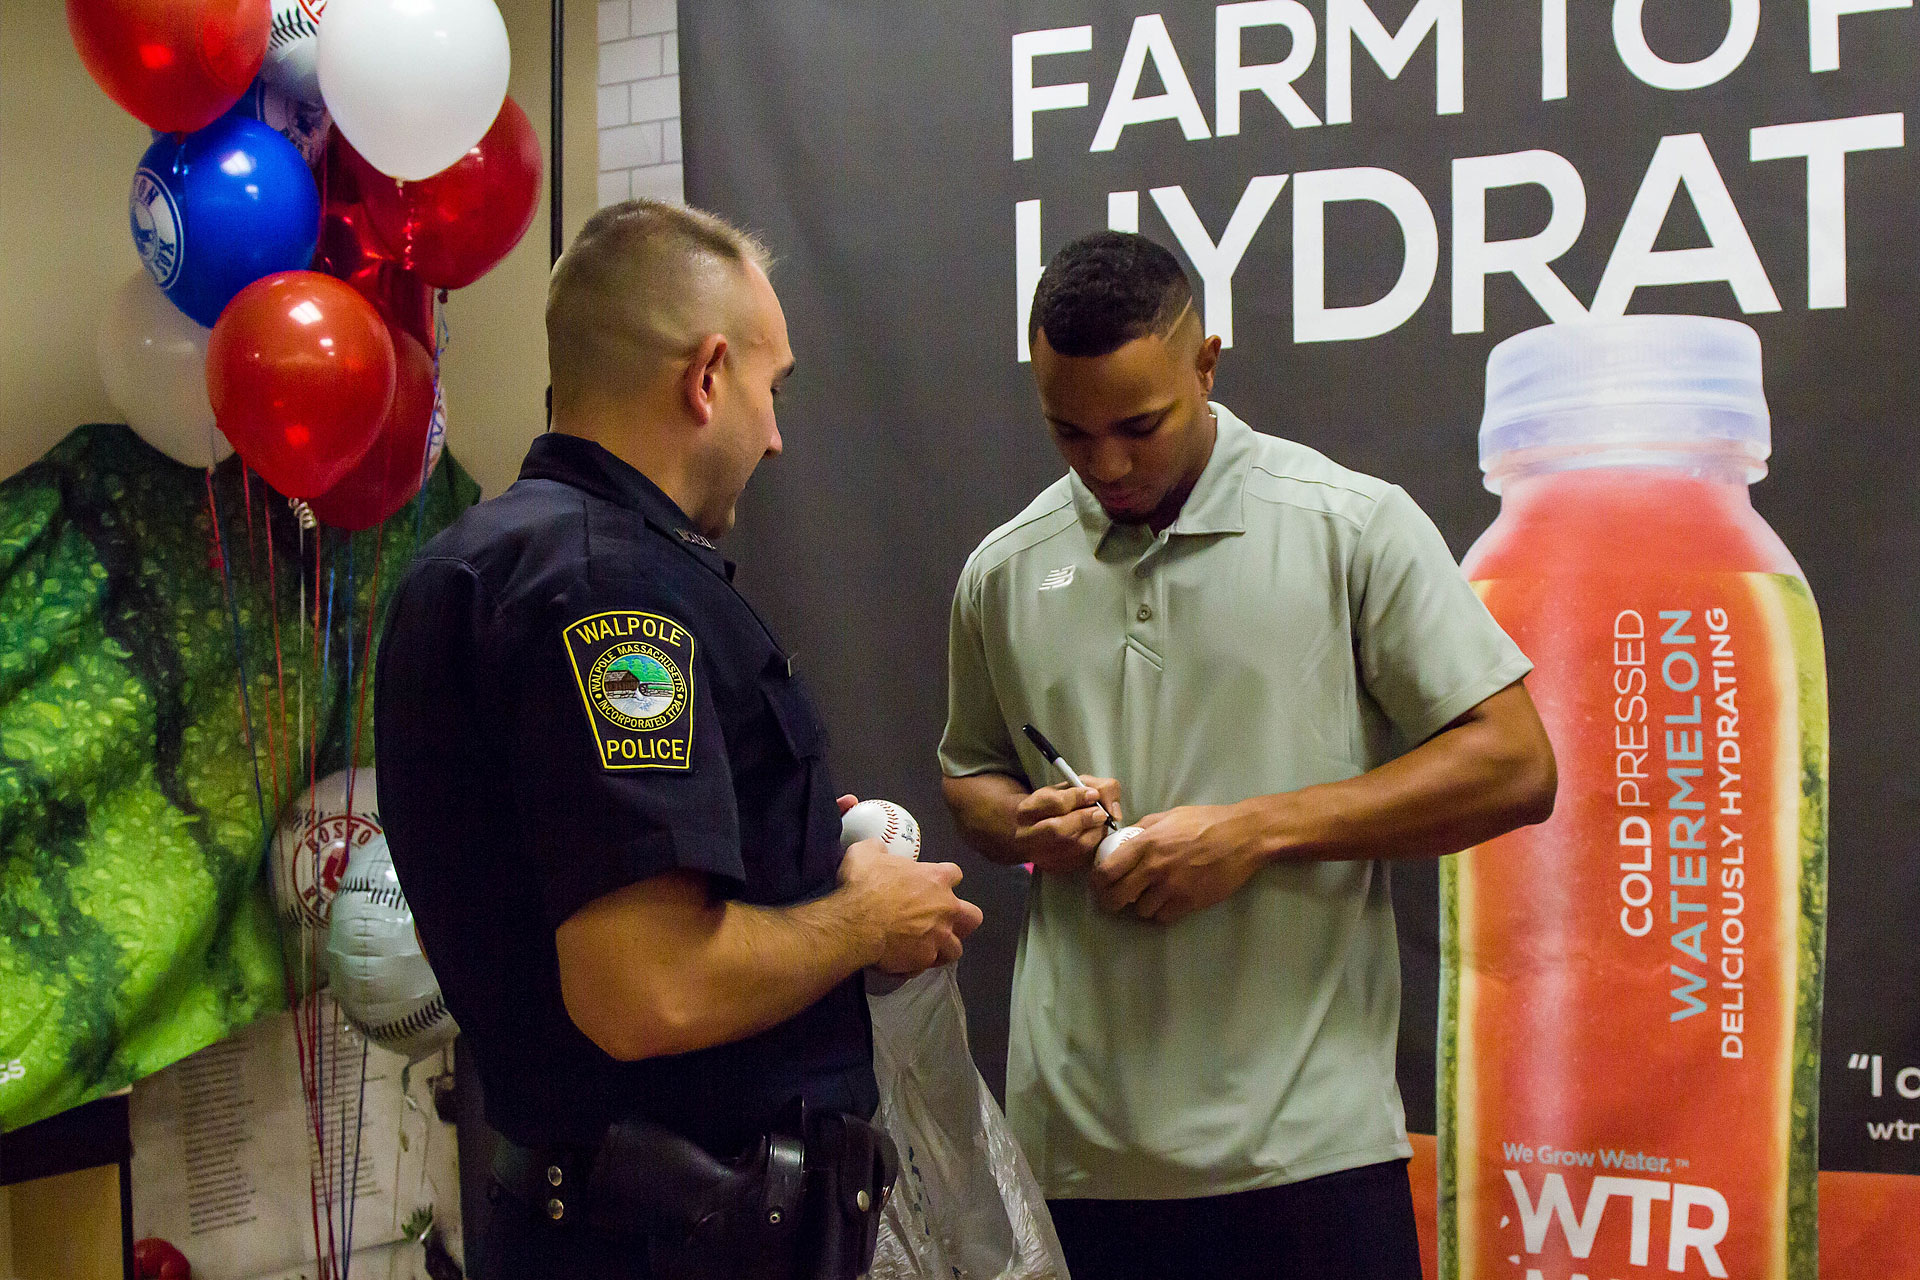 Xander Boegarts Signs Baseball for Fan for WTRMLN WTR at Stop N Shop Appearance